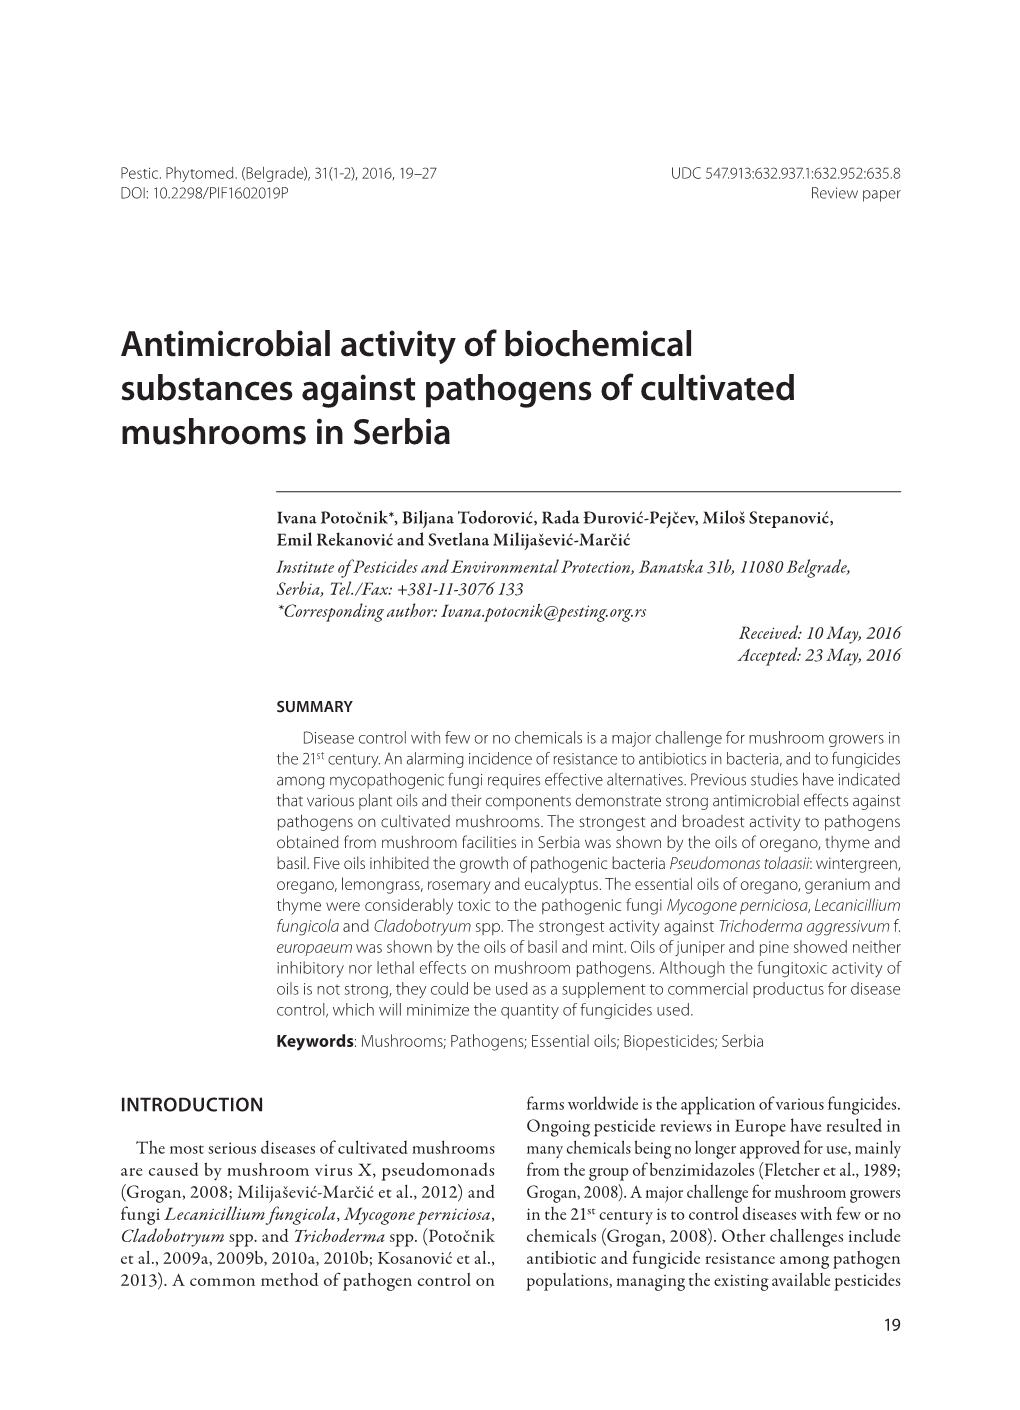 Antimicrobial Activity of Biochemical Substances Against Pathogens of Cultivated Mushrooms in Serbia